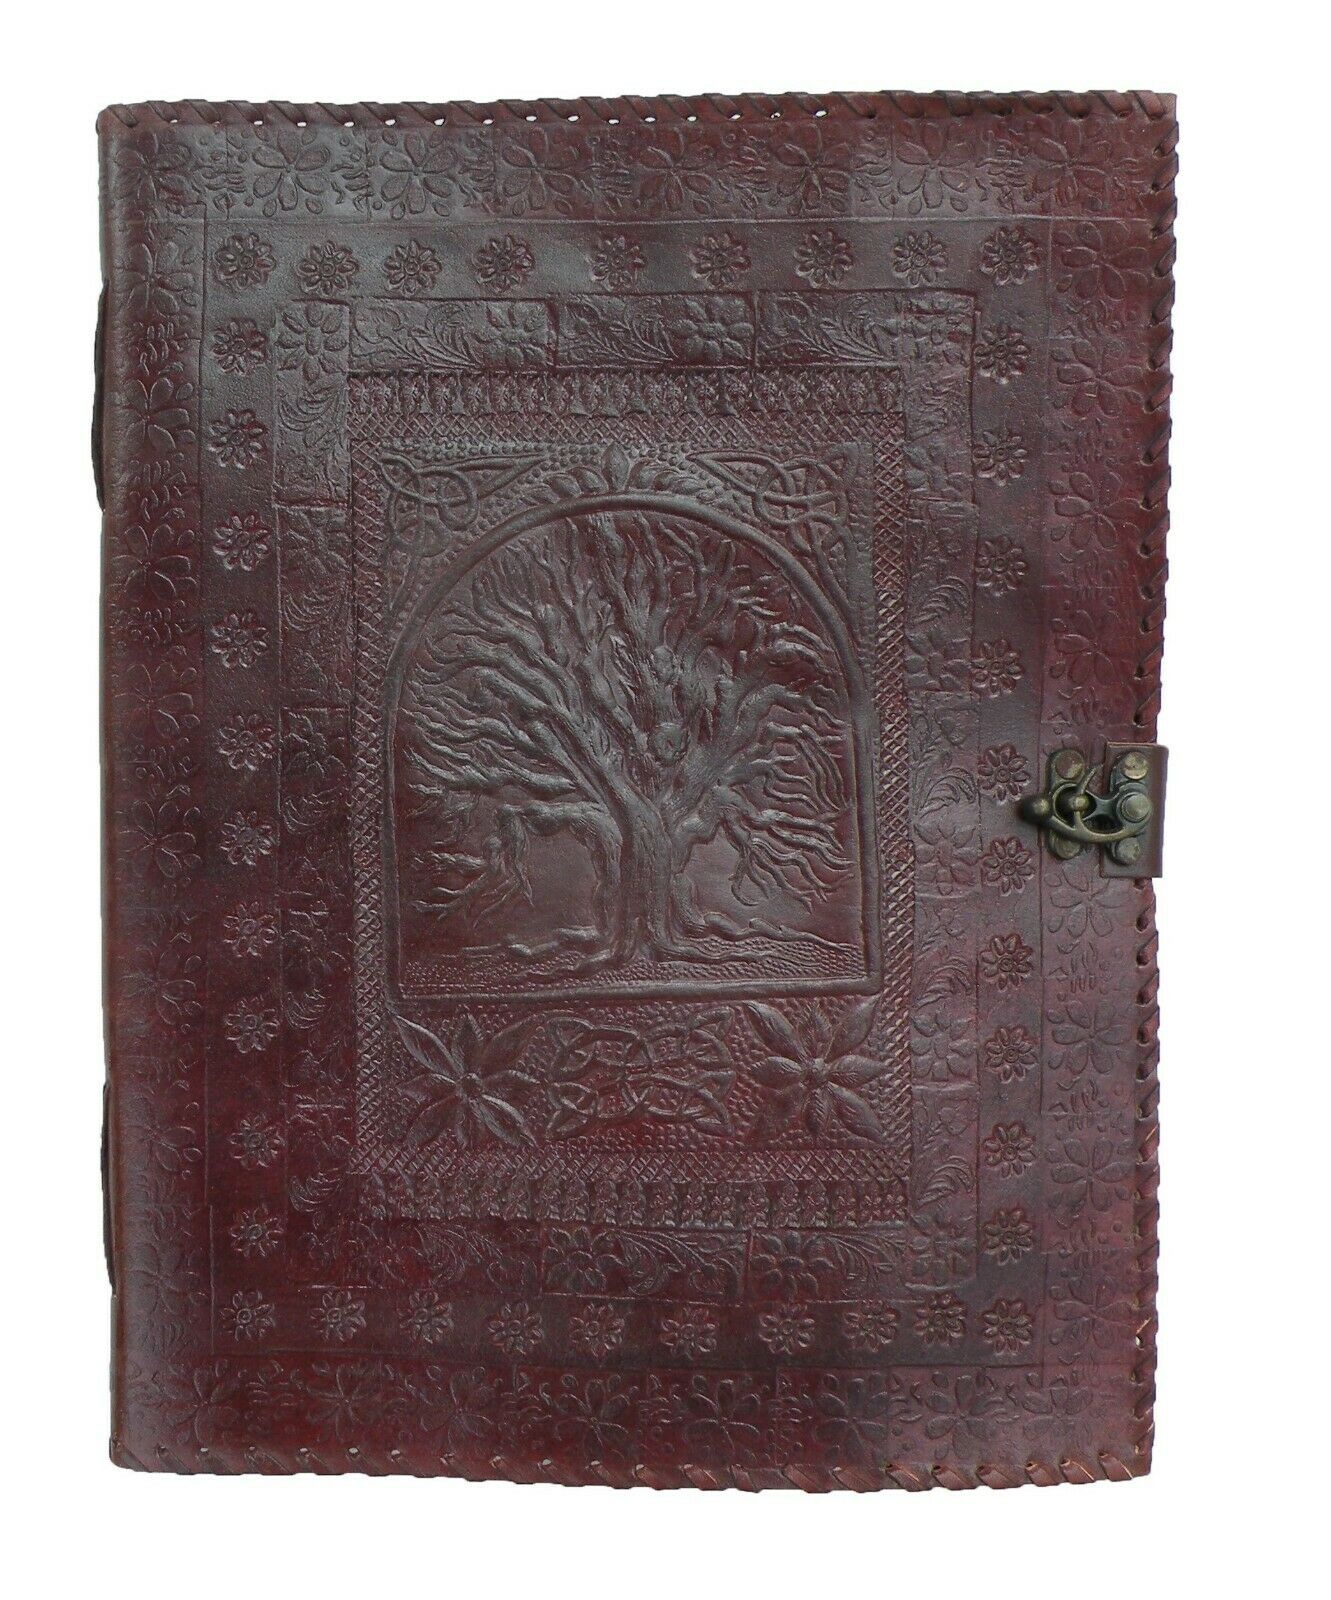 Tree Of Life Leather Journal Embossed Handmade Eco Friendly Sketch Book 7"x5"